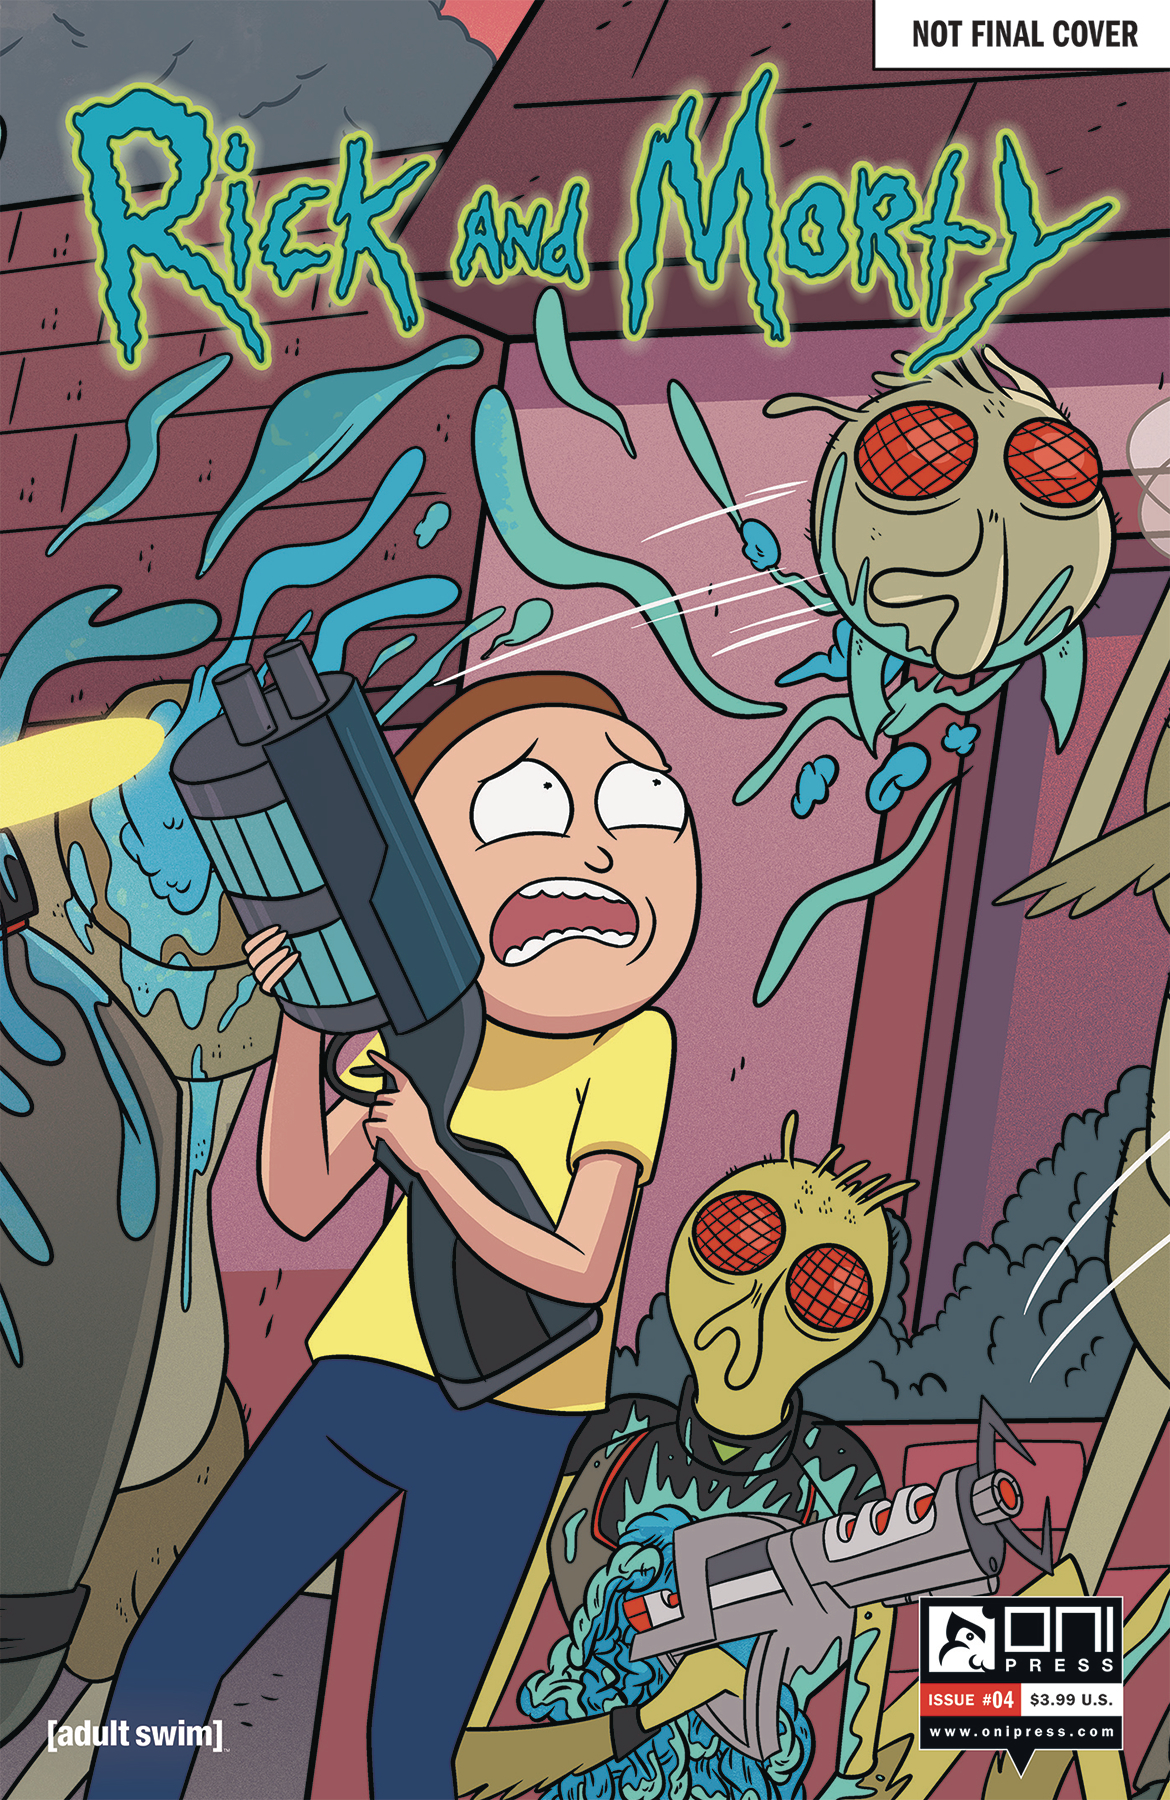 RICK & MORTY #4 50 ISSUES SPECIAL VAR